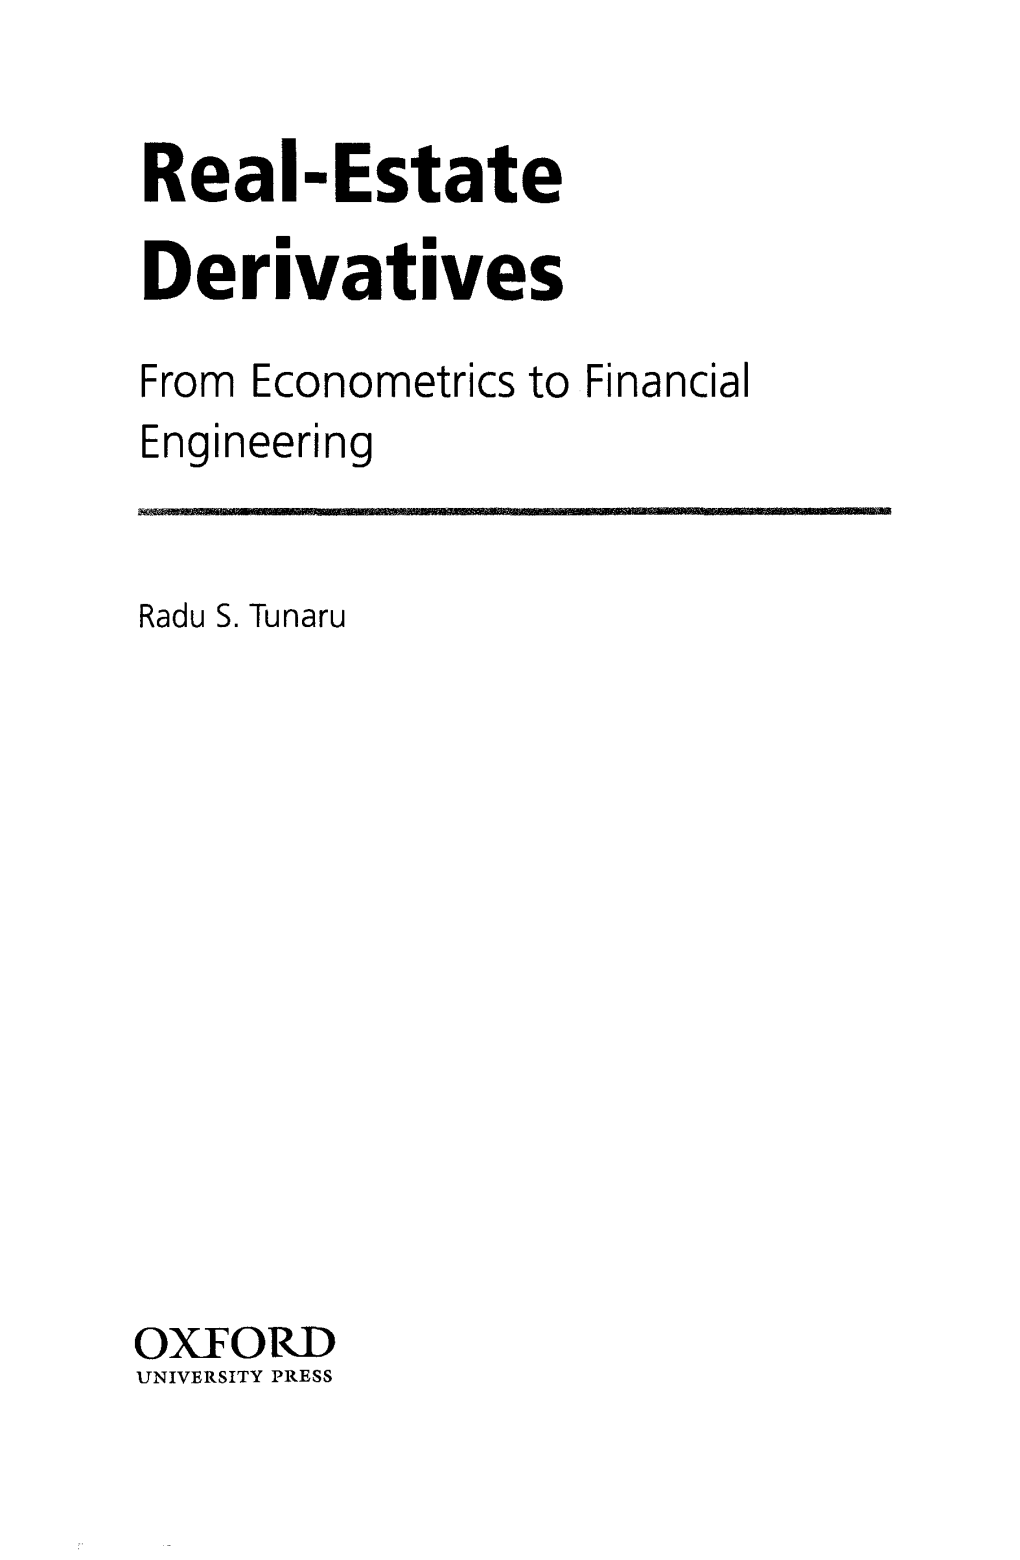 Real-Estate Derivatives from Econometrics to Financial